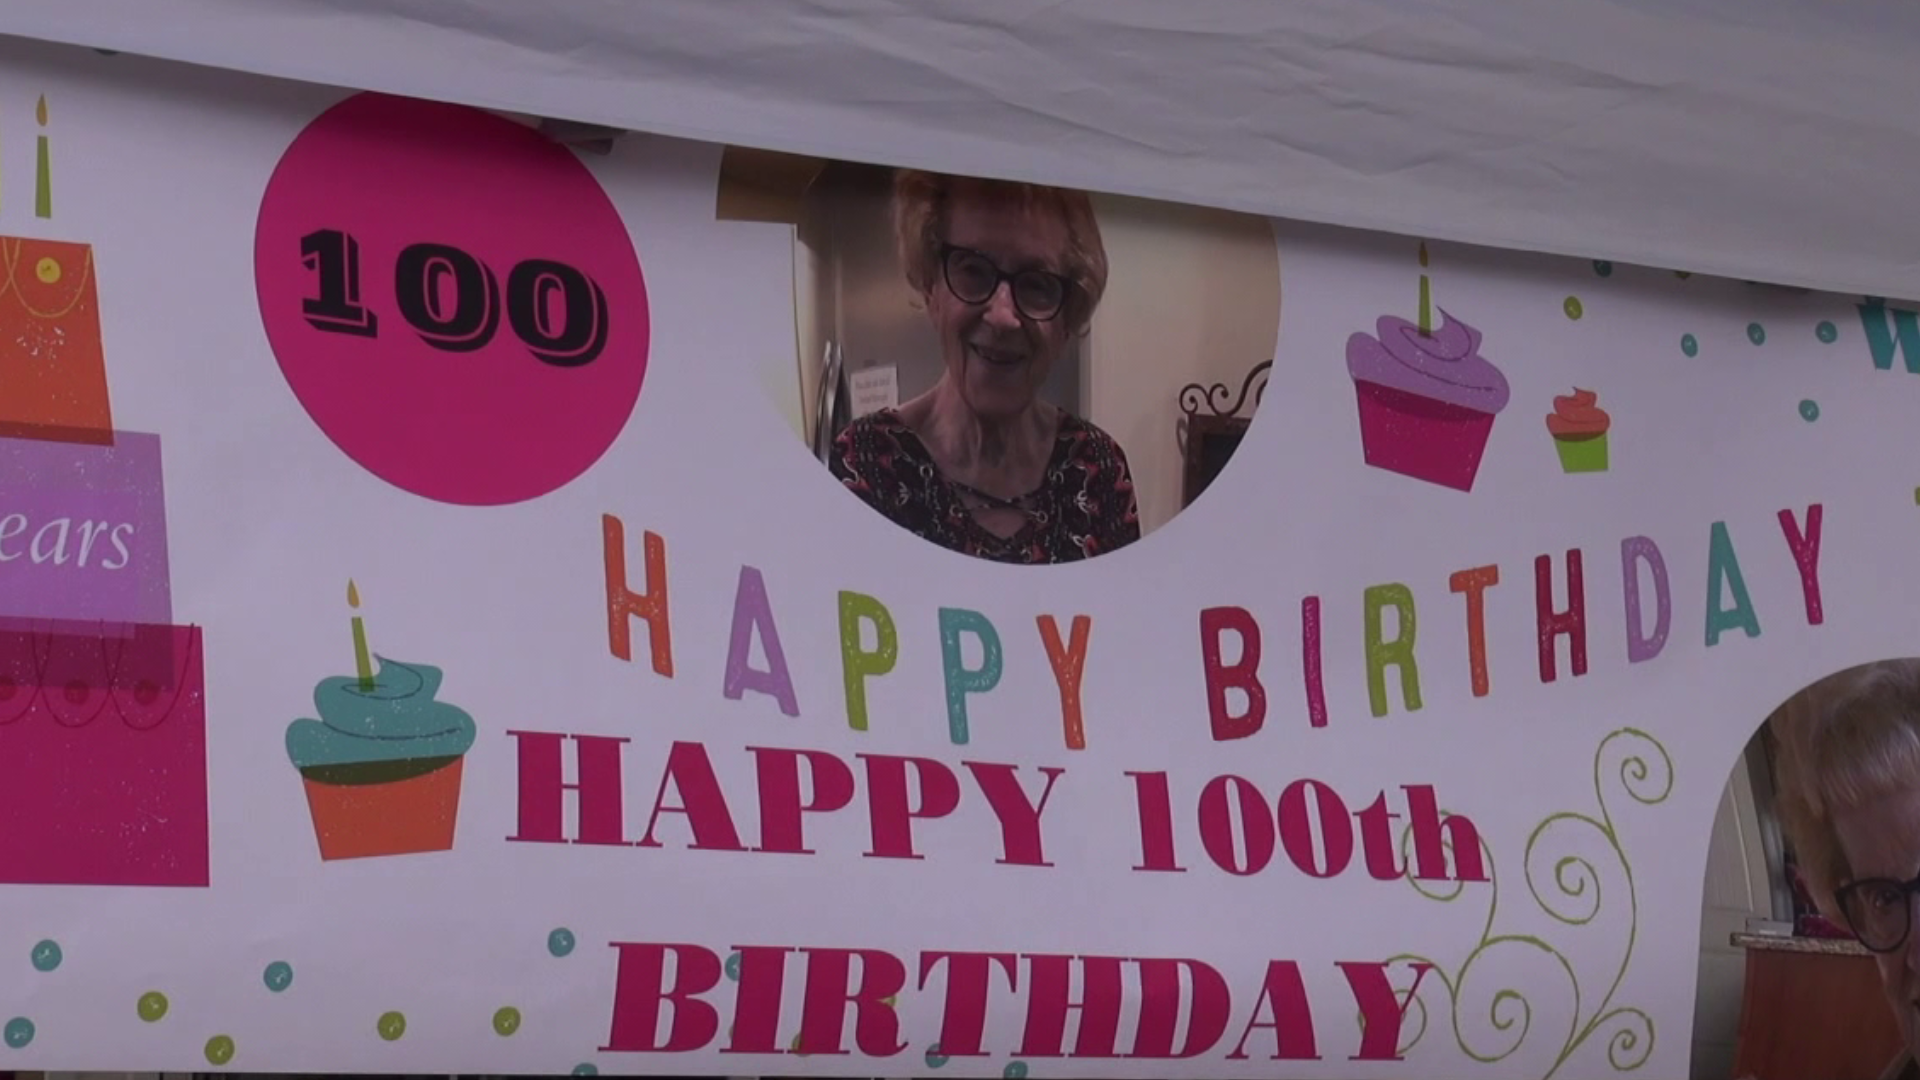 Since the 100-year-old can't leave the nursing home, friends and family brought the party to her.